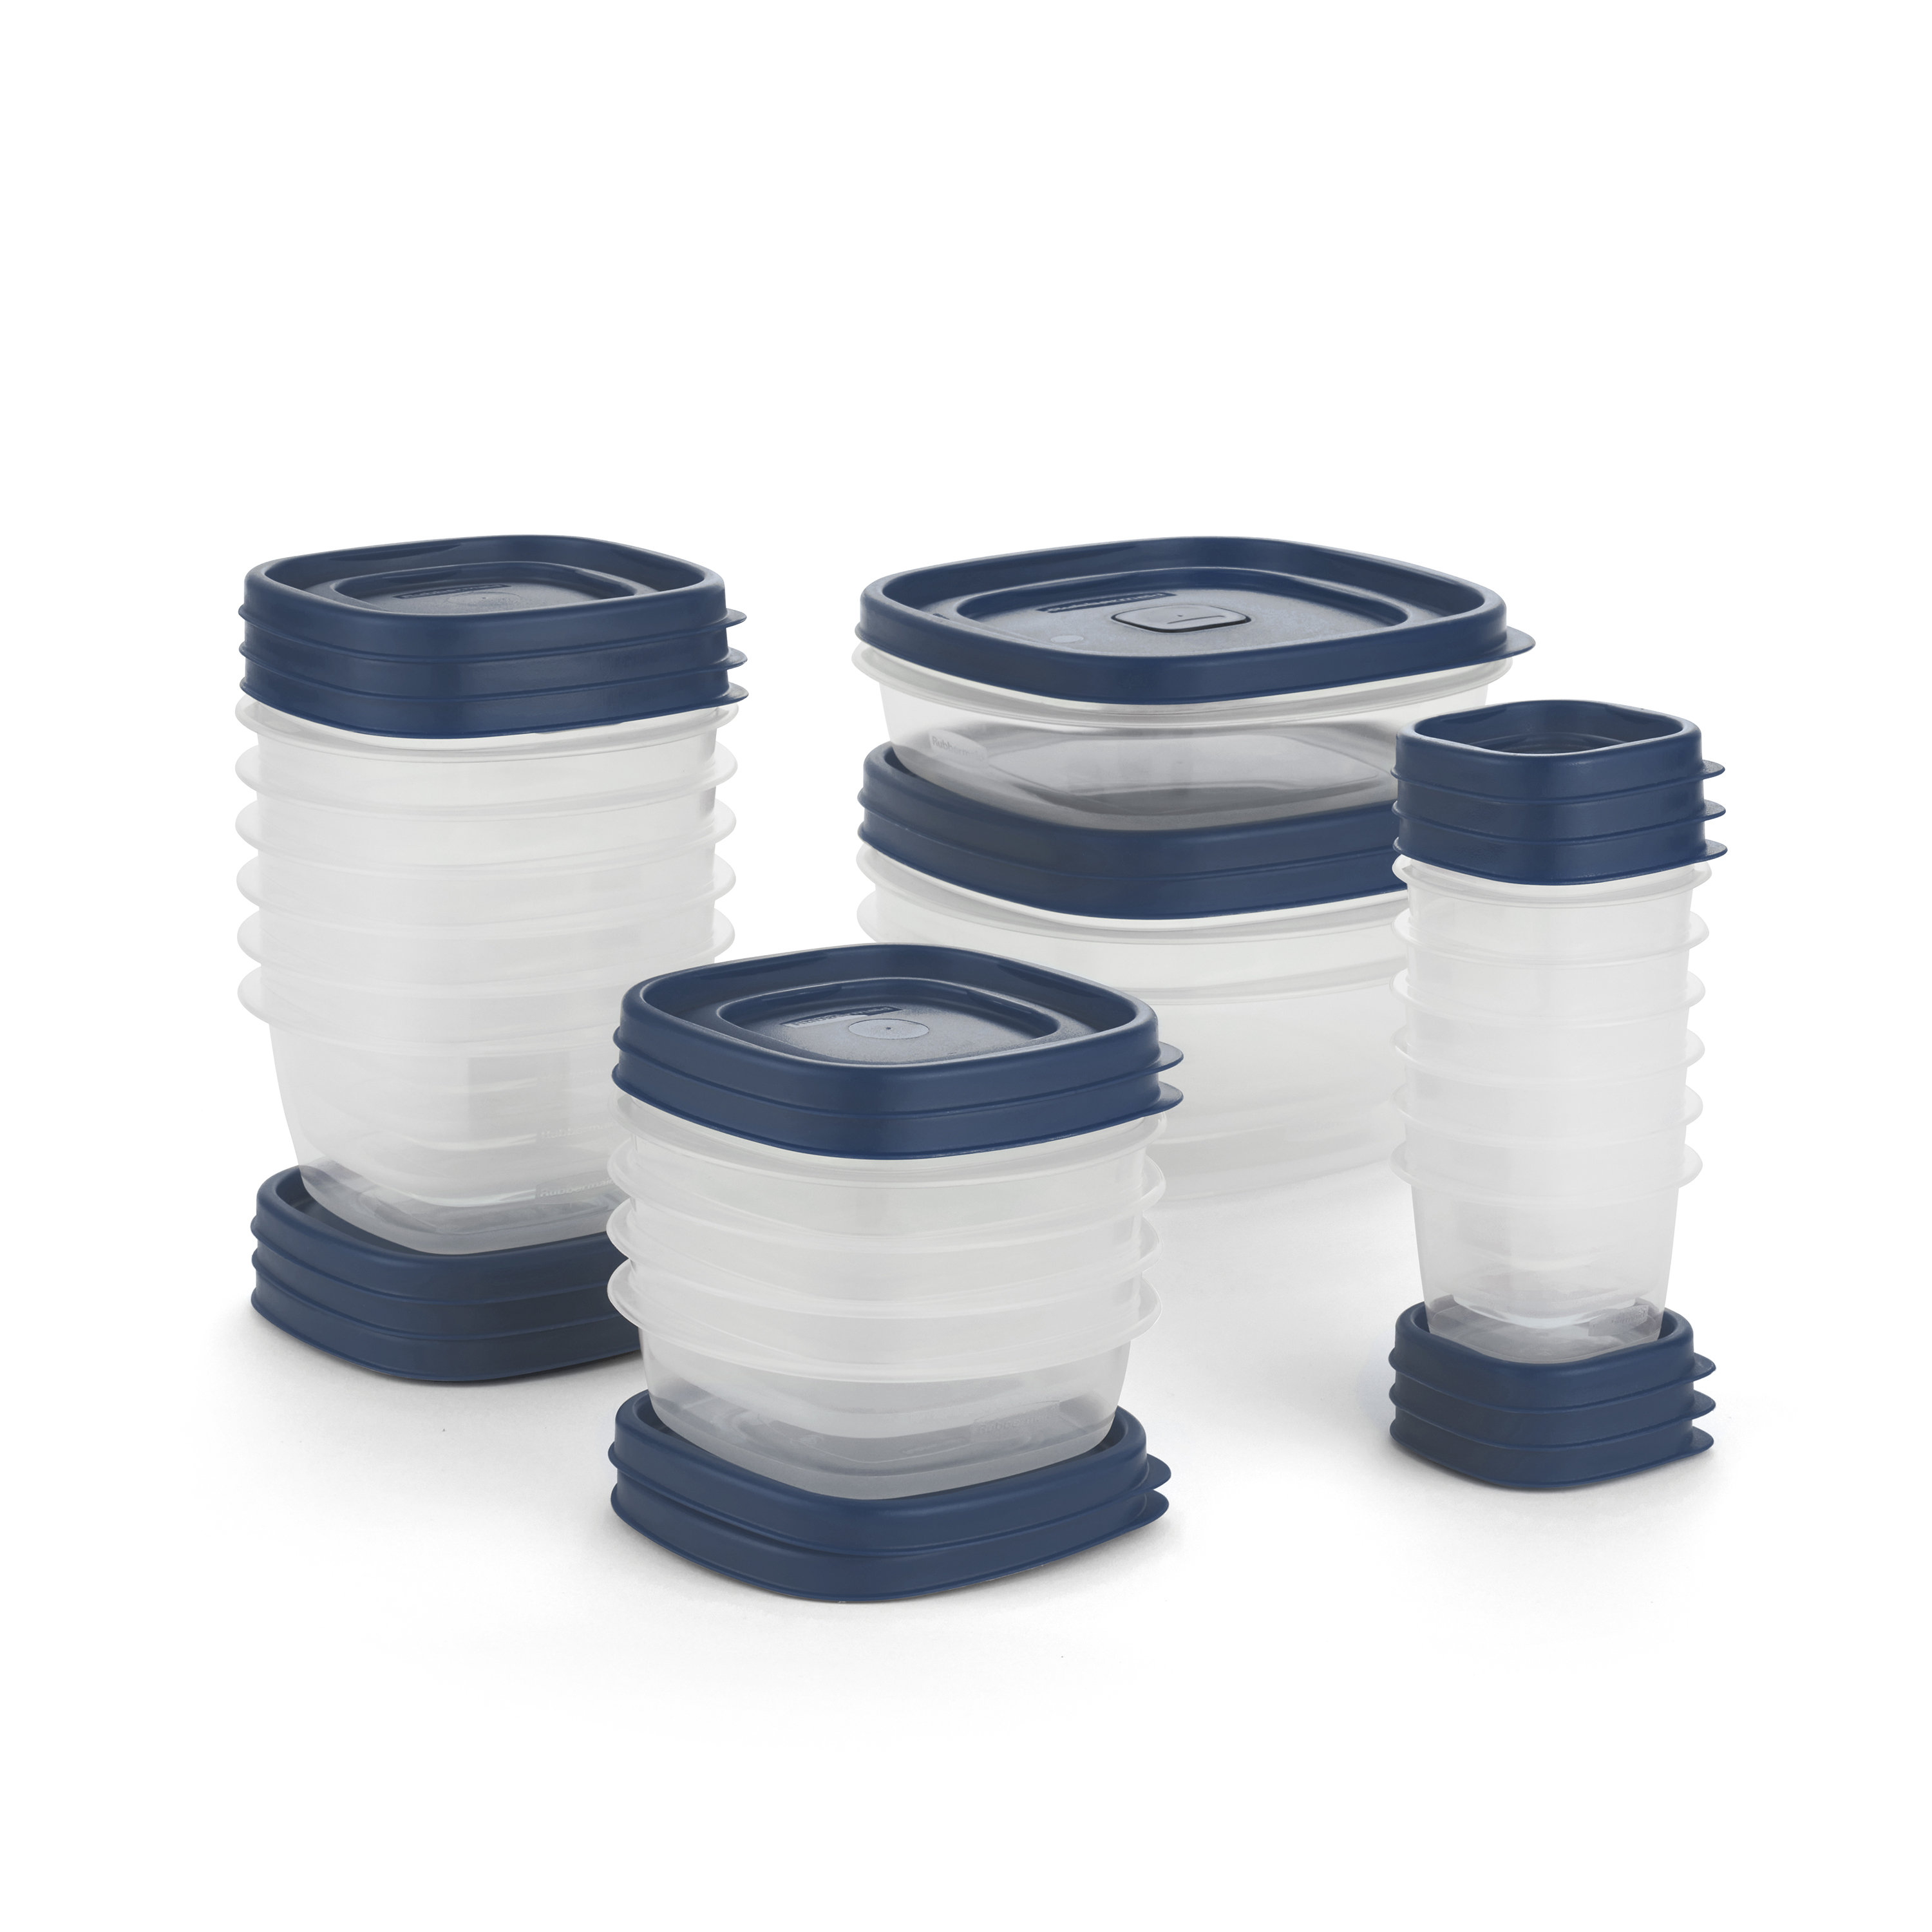 Rubbermaid EasyFindLids Variety Set of 13 Vented Plastic Food Storage Containers with Navy Lids (26 Pieces Total) - image 5 of 7